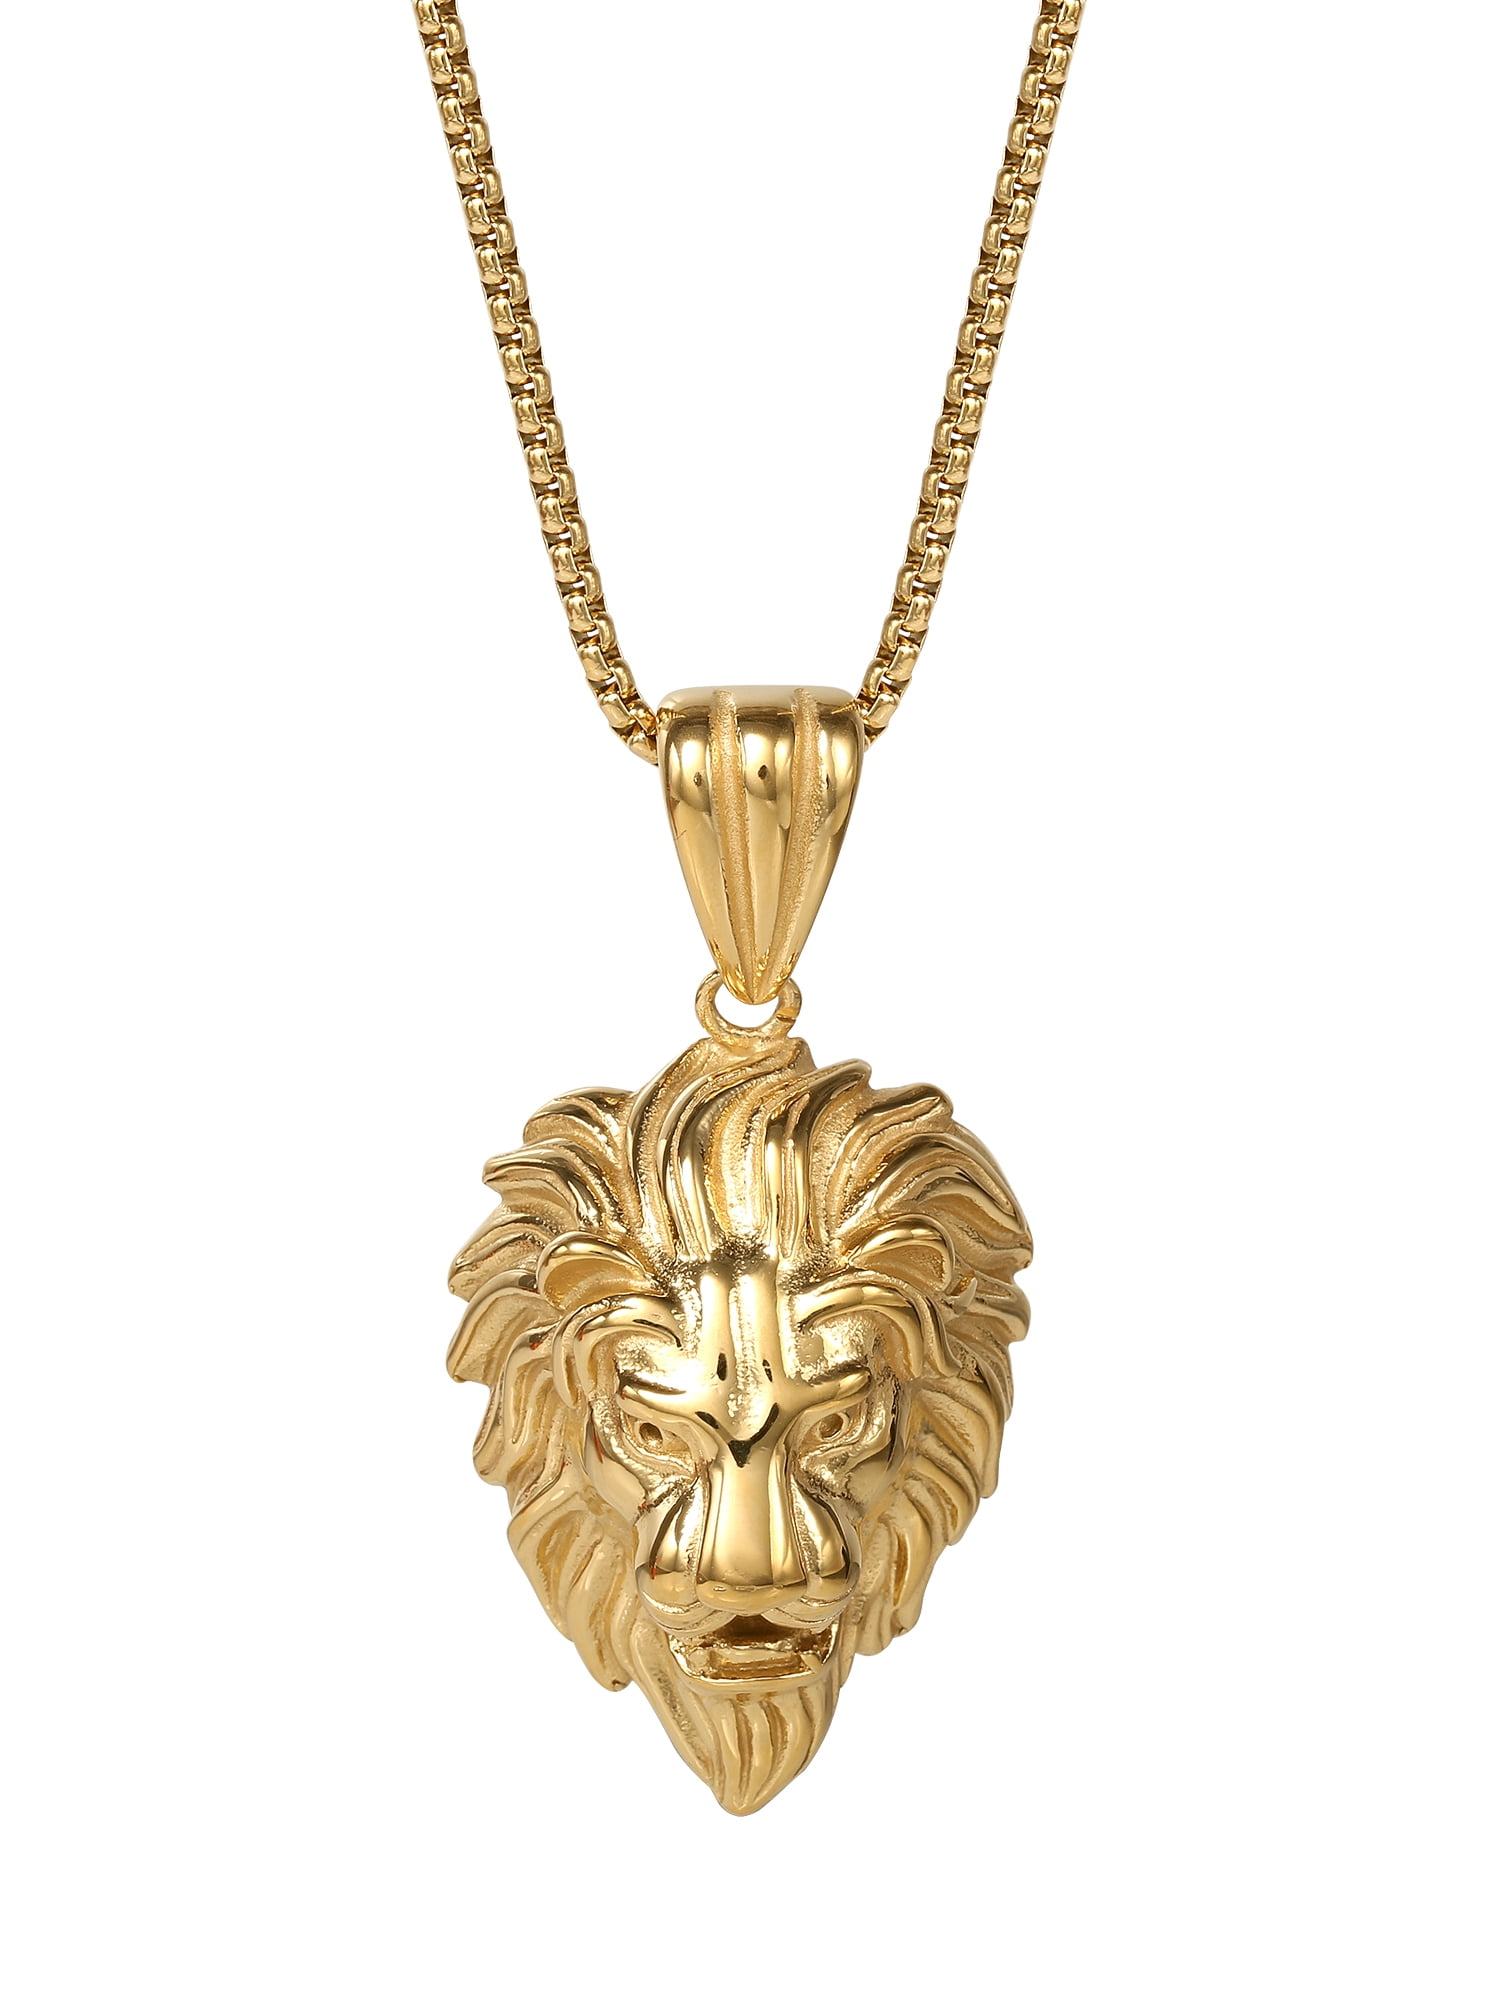 COOL Men's Stainless Steel Gold Lion   With Stone Pendant Necklace Rope Chain 